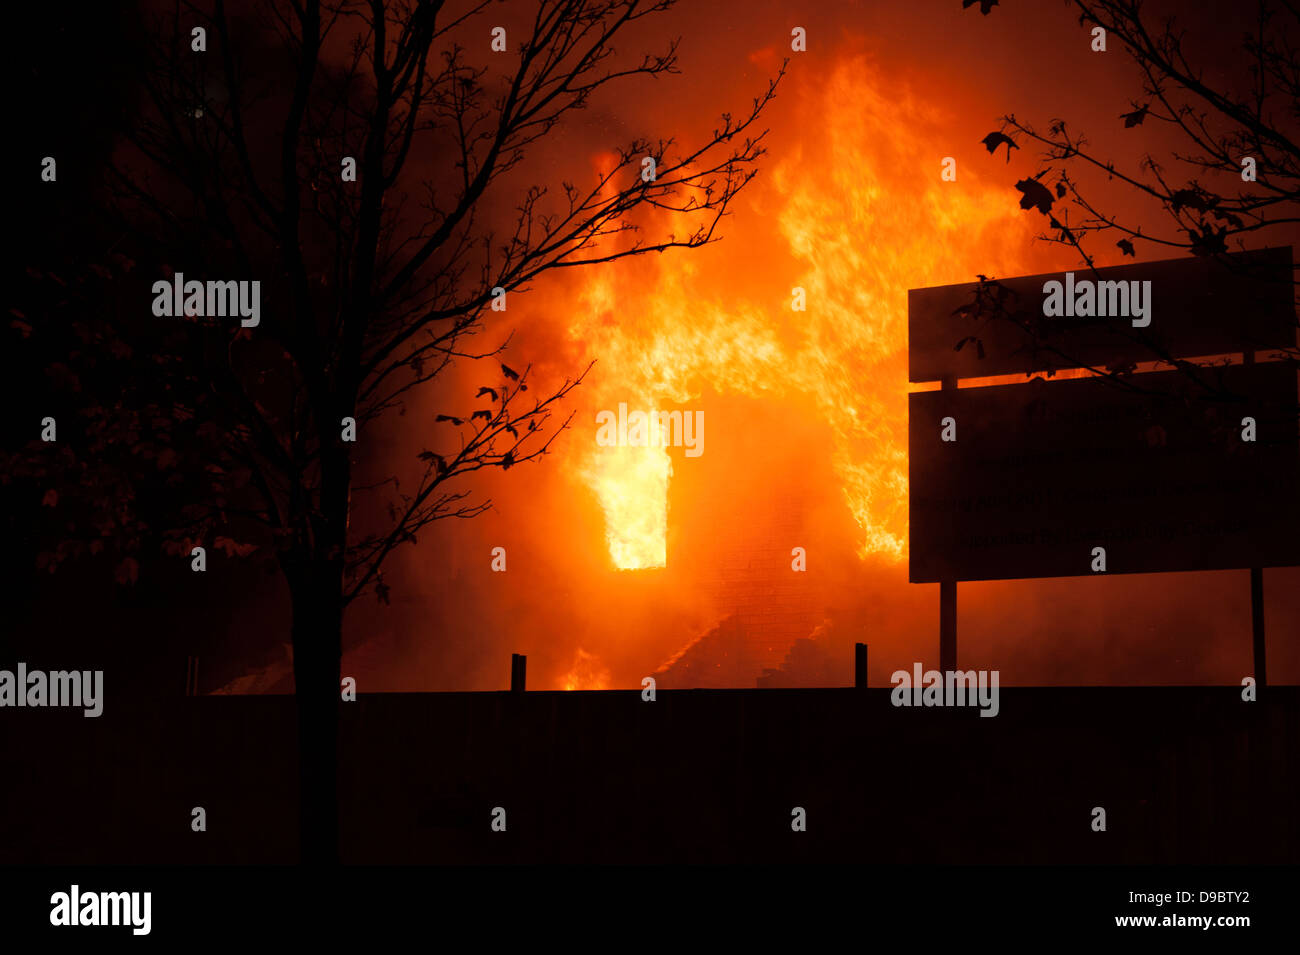 Fierce Flames from apartment Bedroom Fire Real Stock Photo